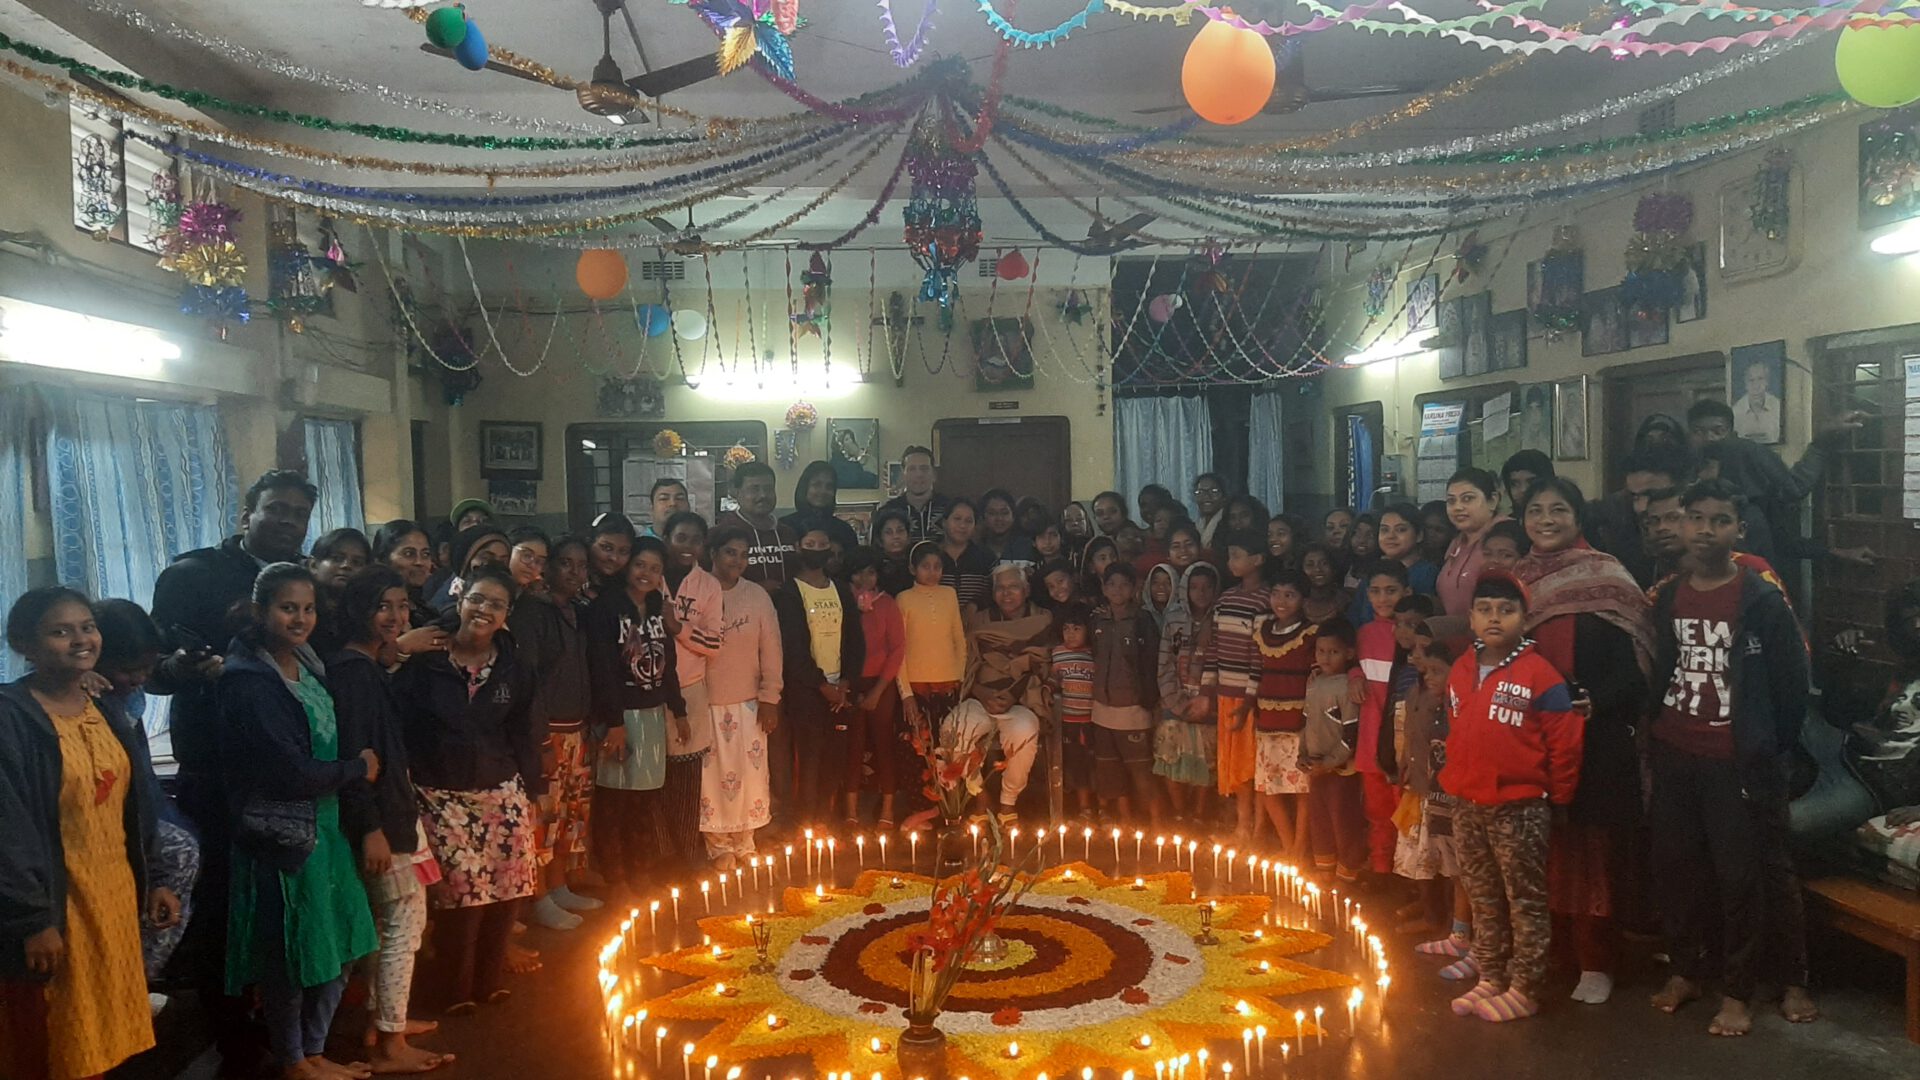 Celebration of Christmas with all the children of FAMILIA.